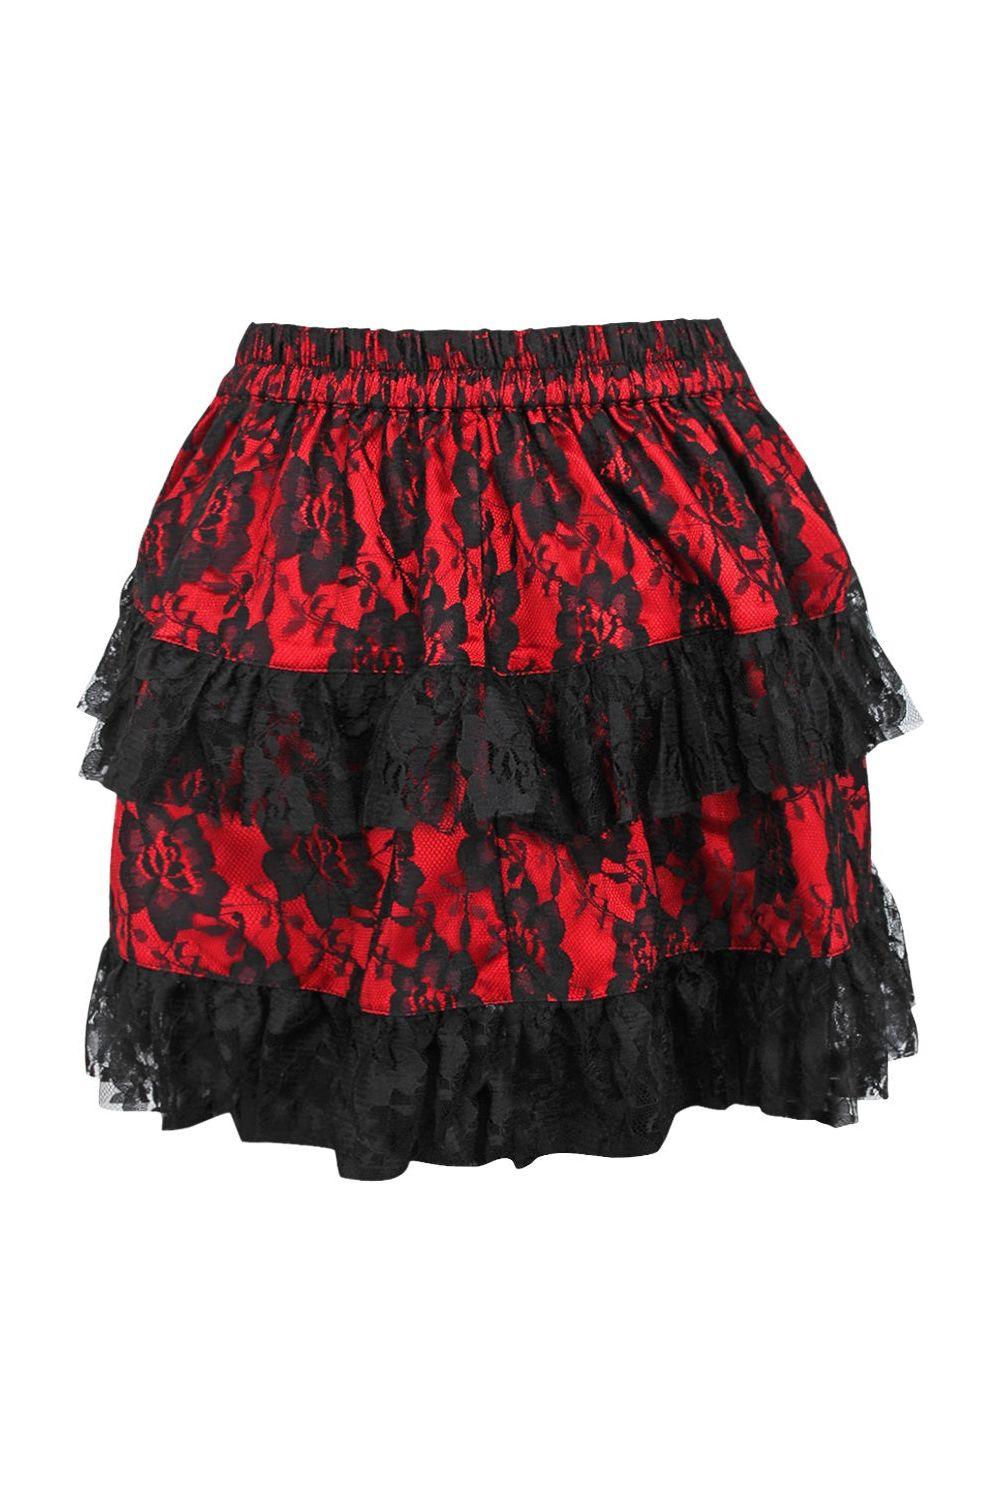 Red/Black Lace Ruched Bustle Skirt